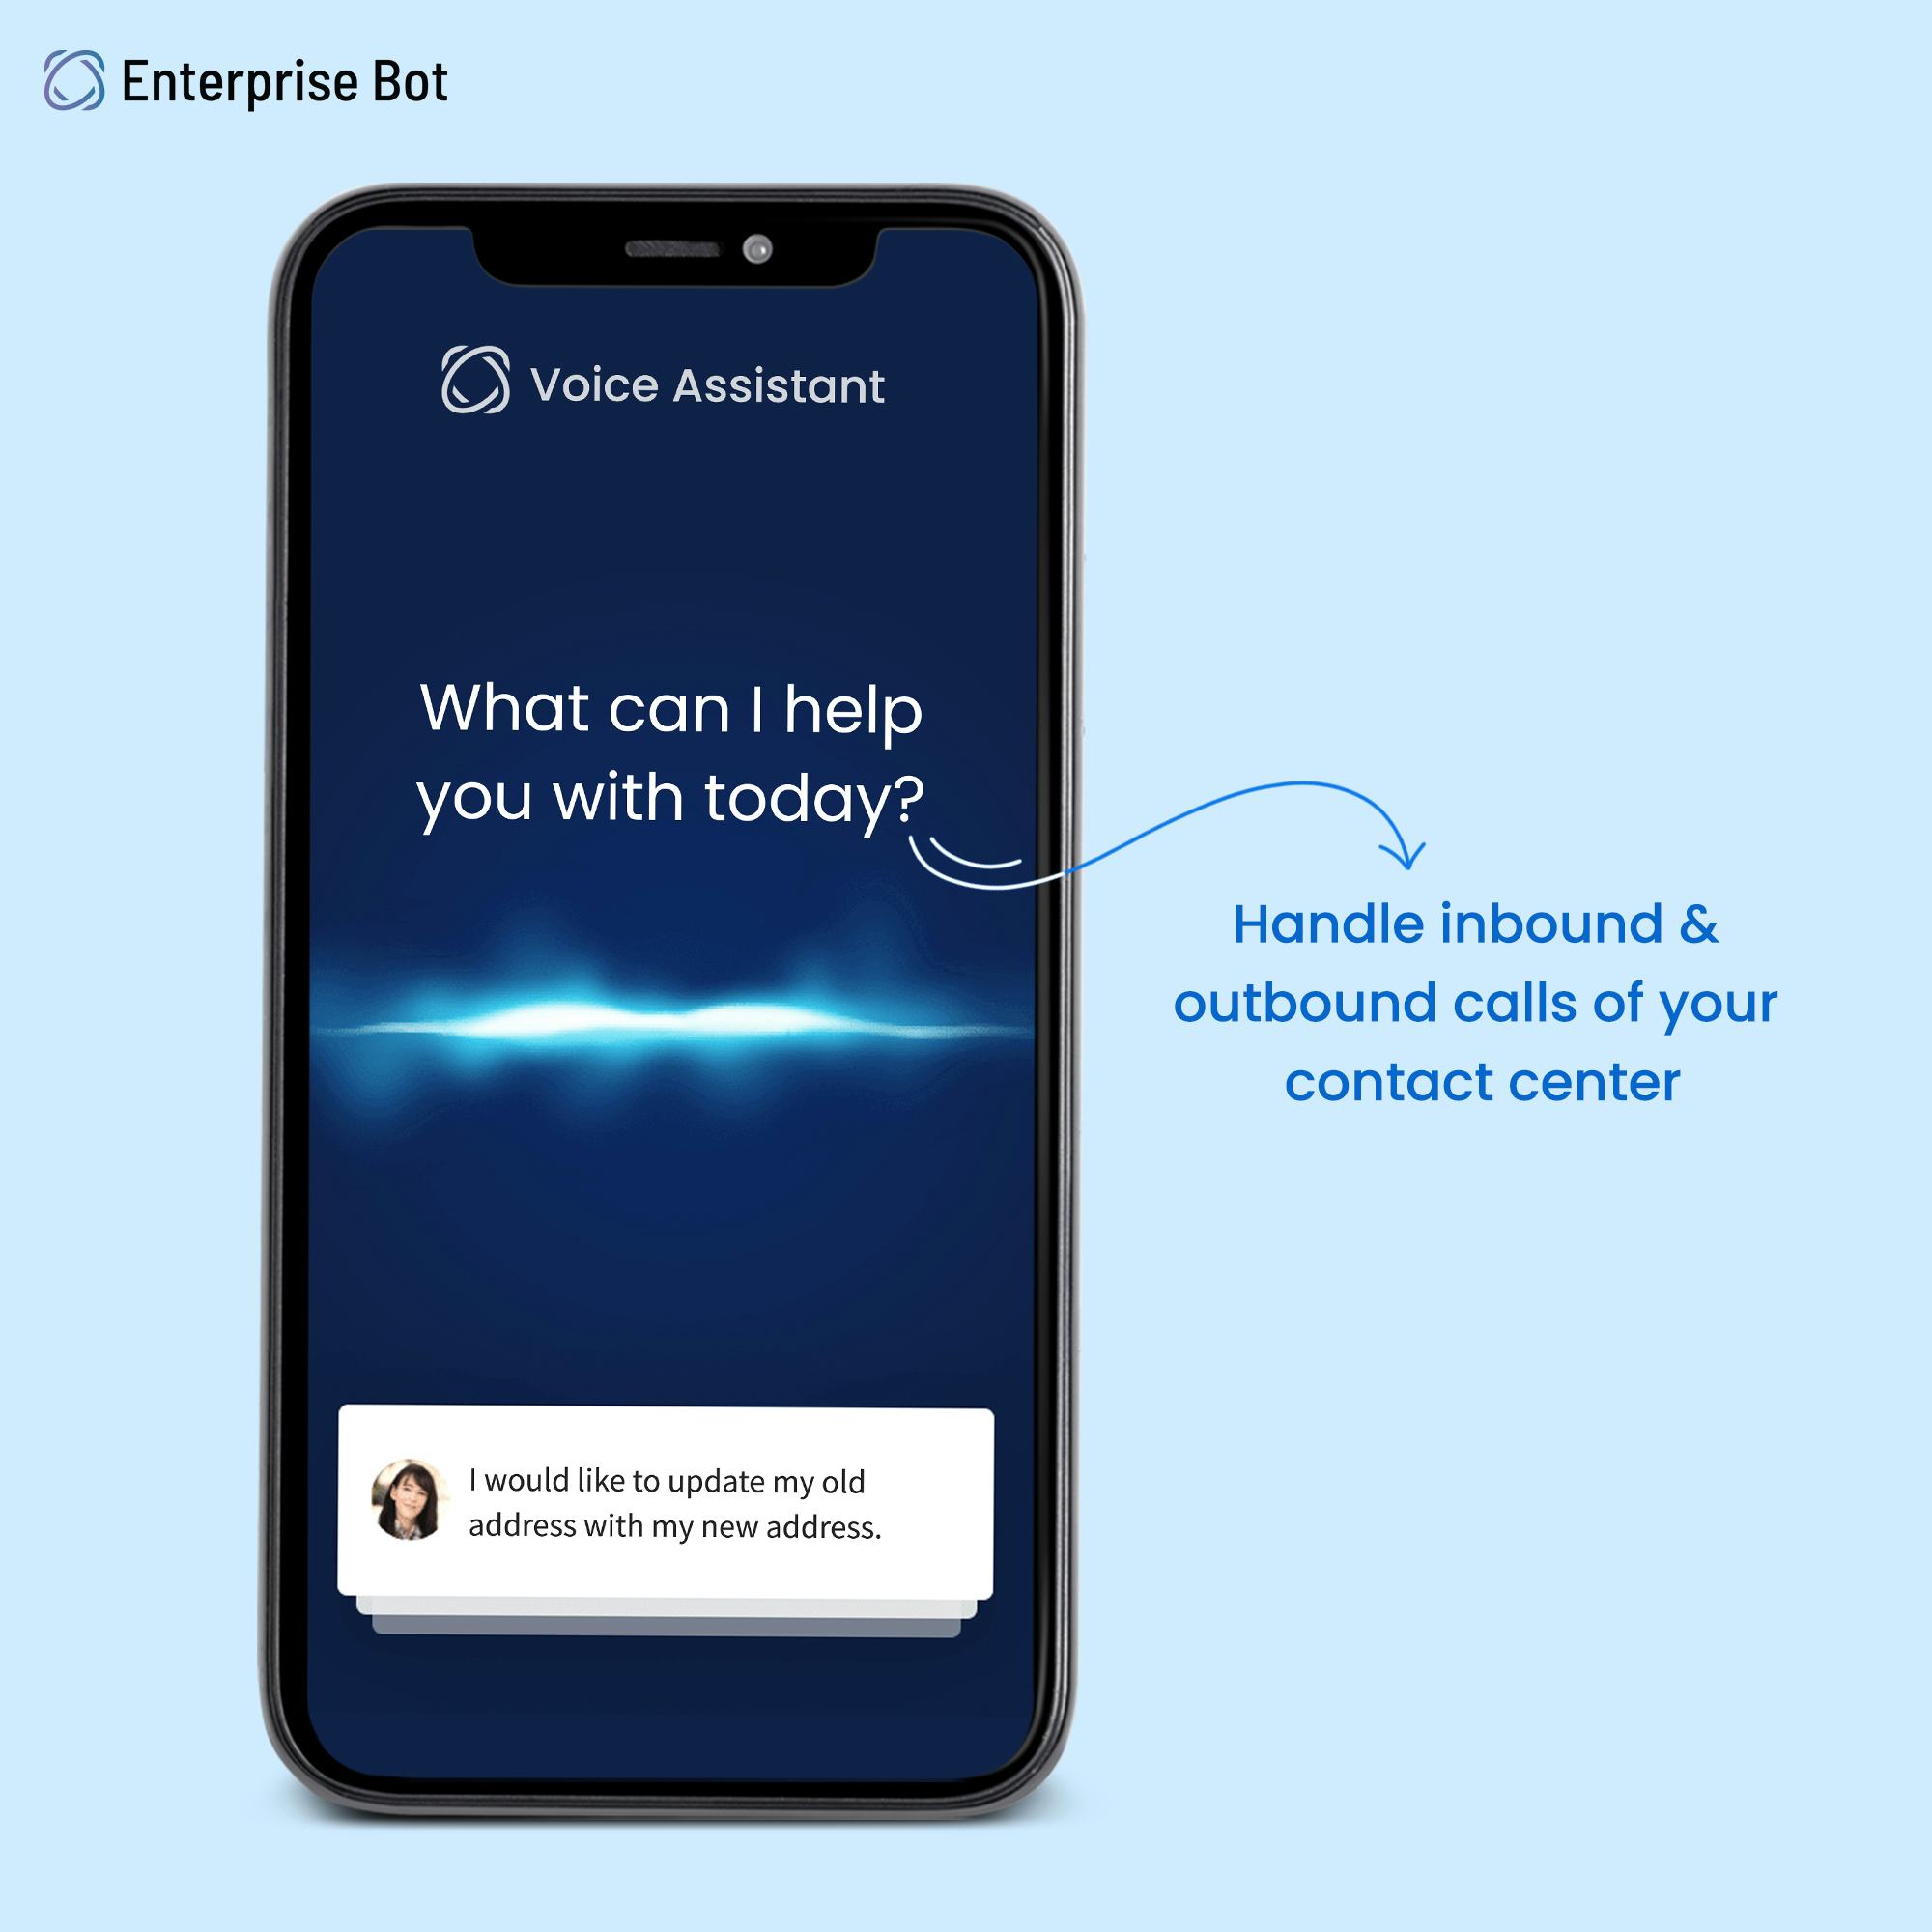 Enterprise Bot Software - Voice assistant to handle all your incoming calls and also to reach out to prospects and customers through outbound calls